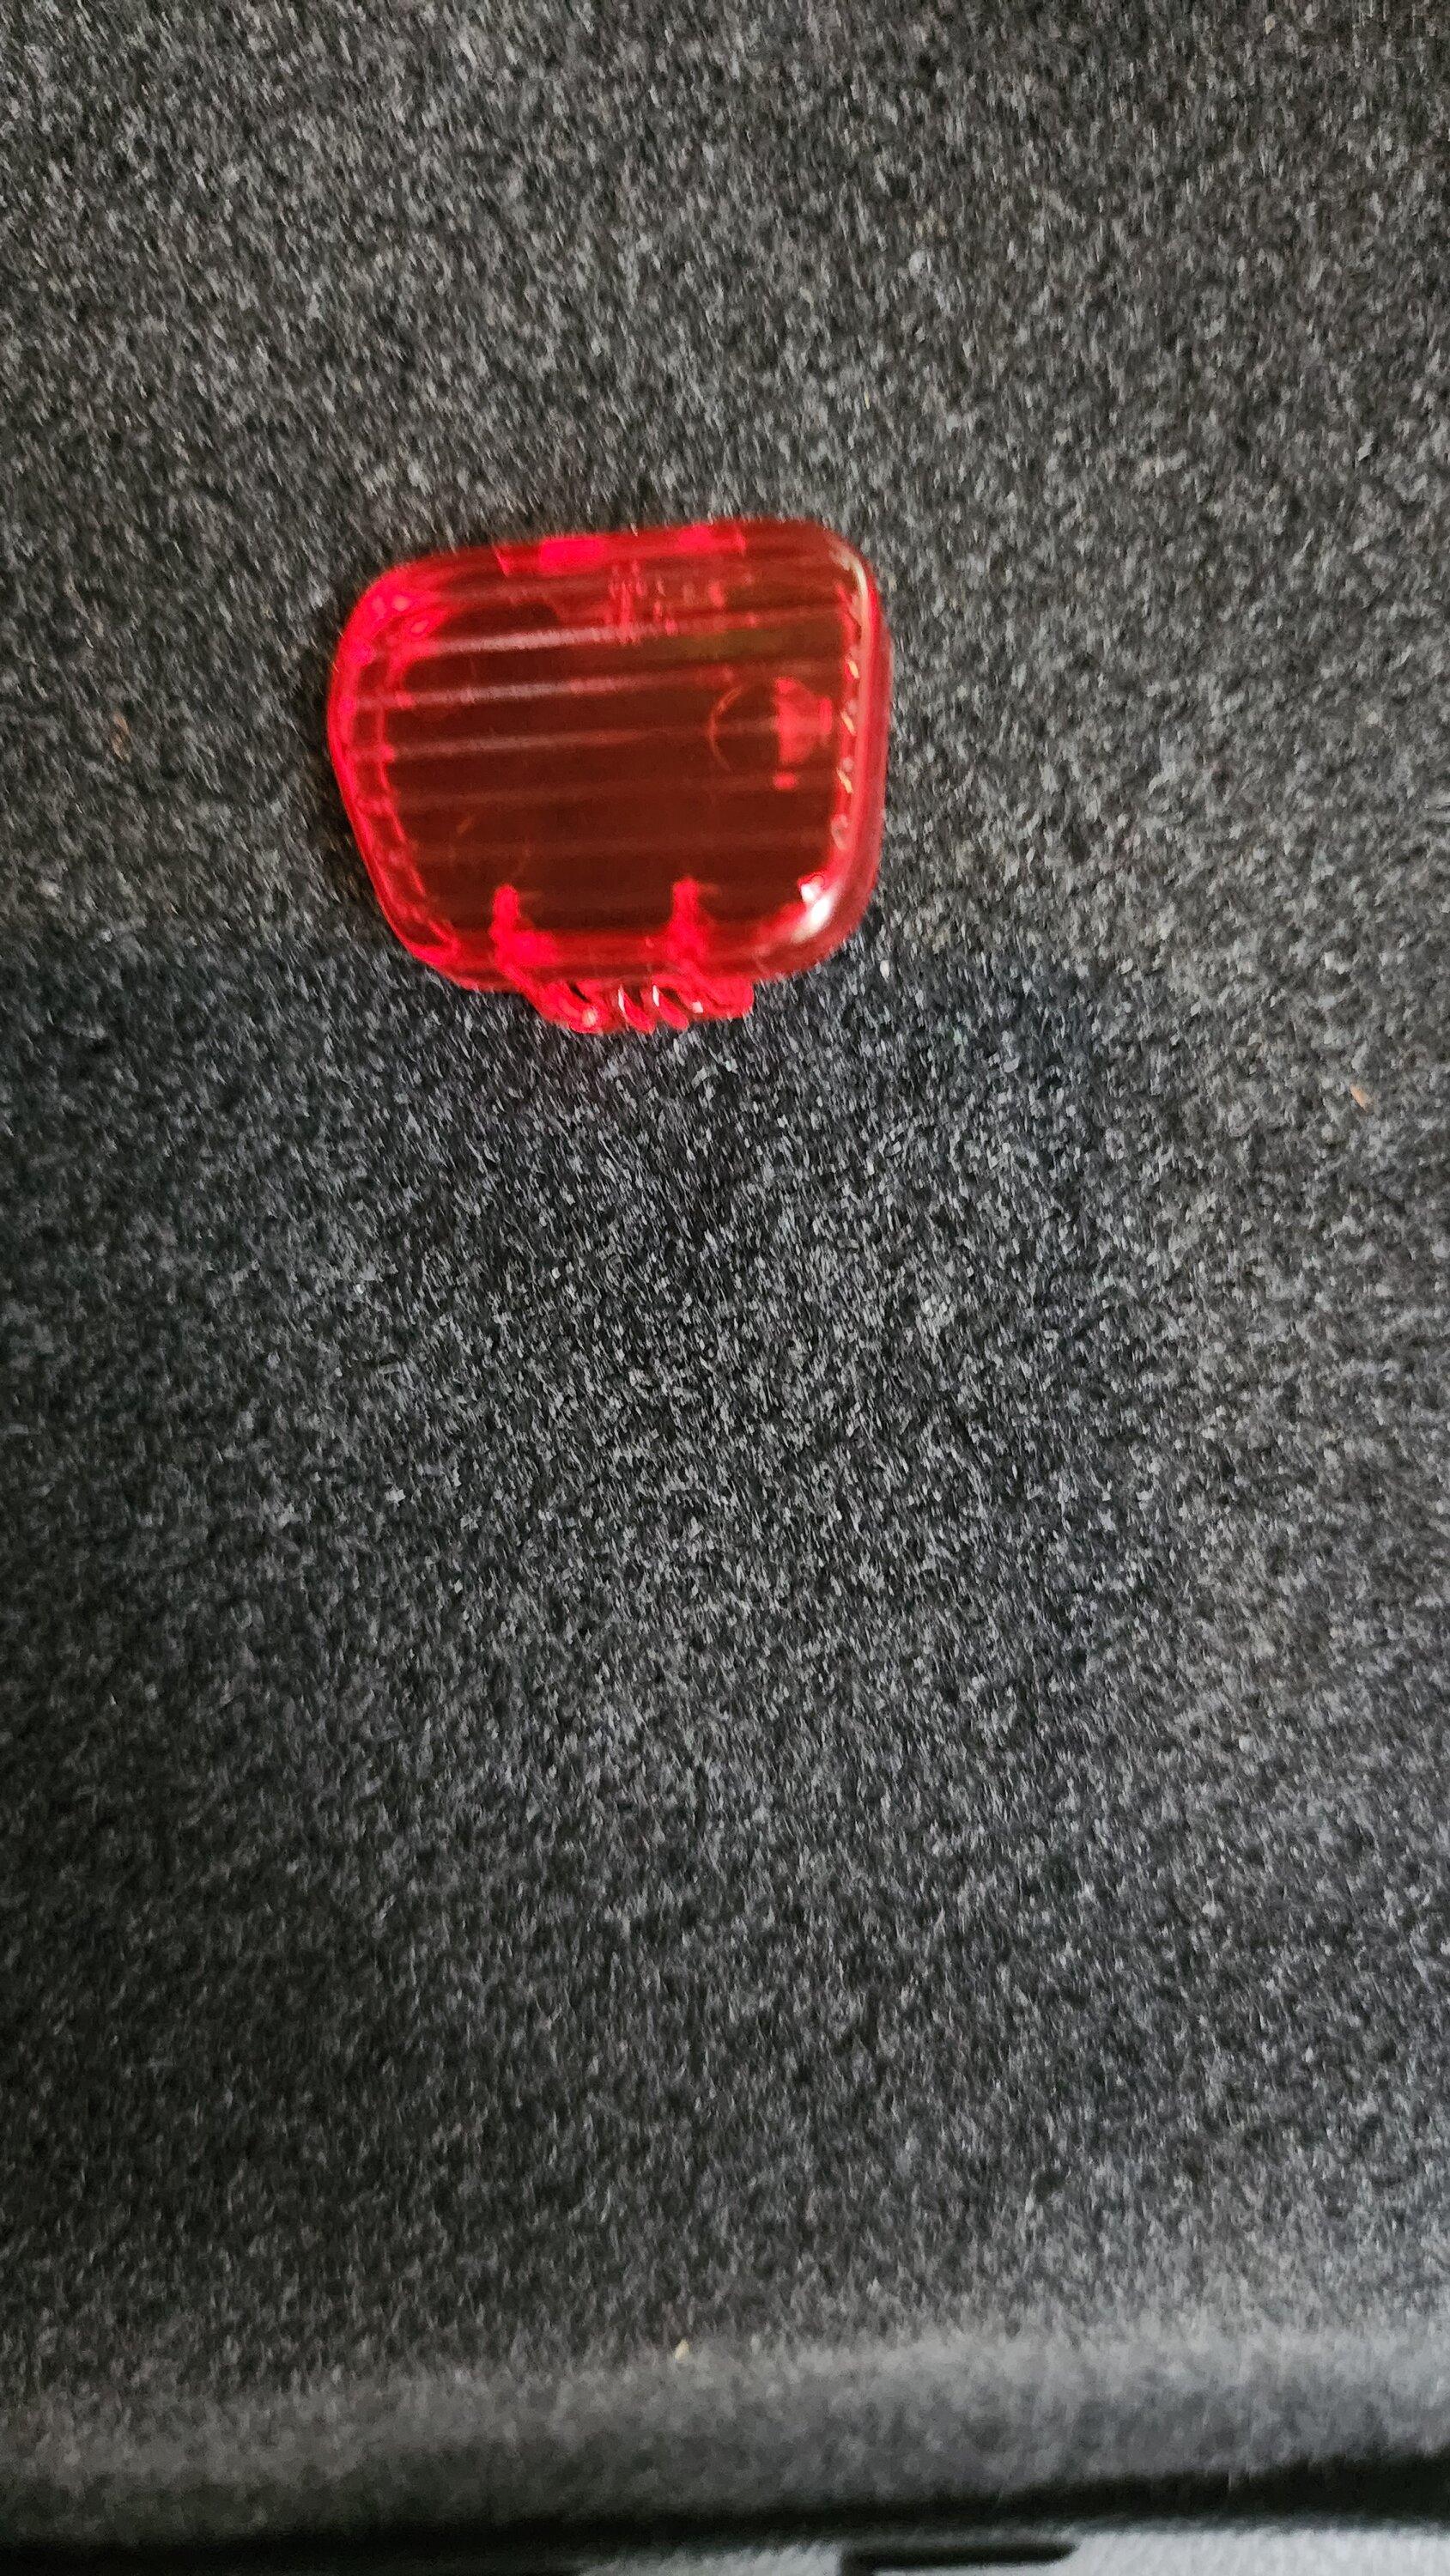 Ford F-150 Lightning Know what this red light lens is for? 20230718_144906